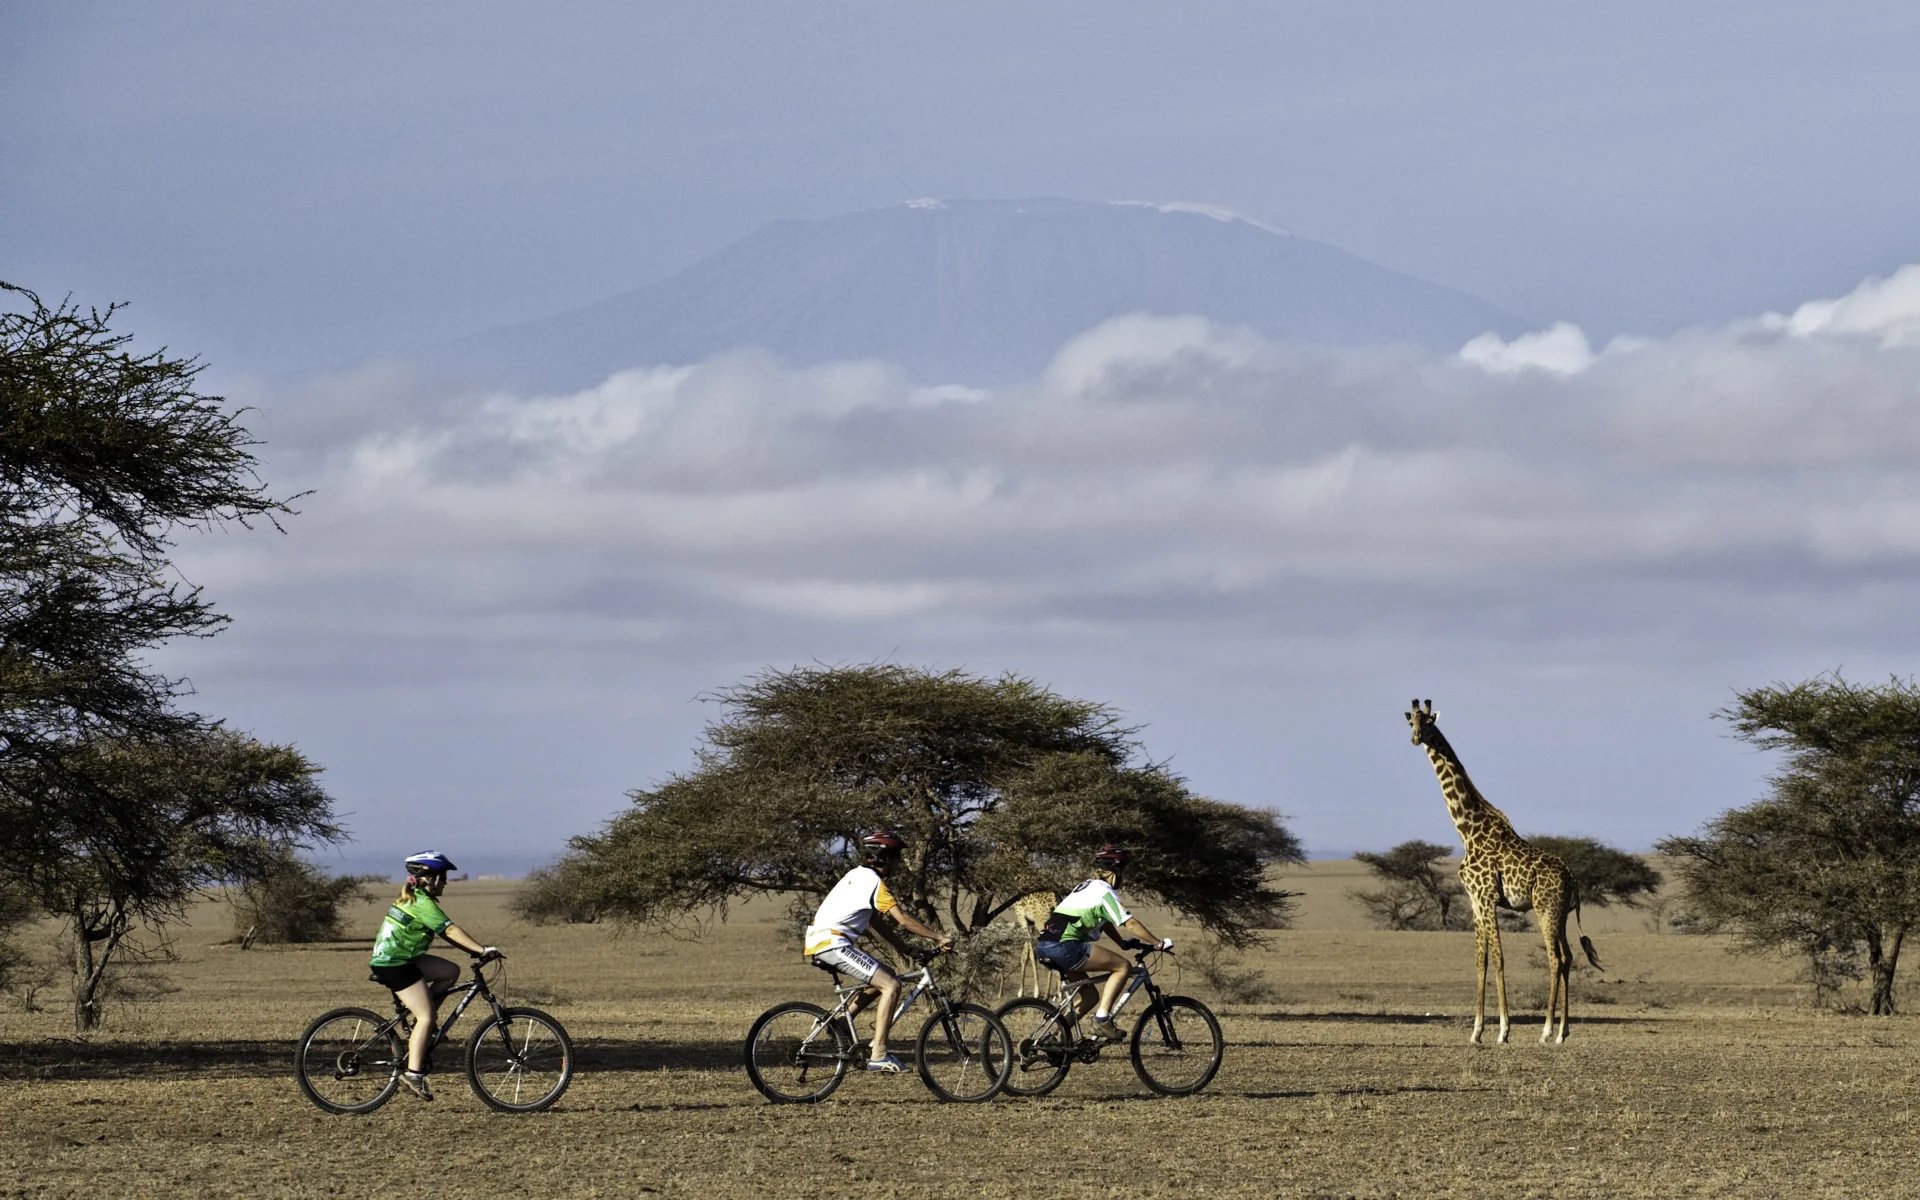 A family cycle past a giraffe in Ol Donyo National Park